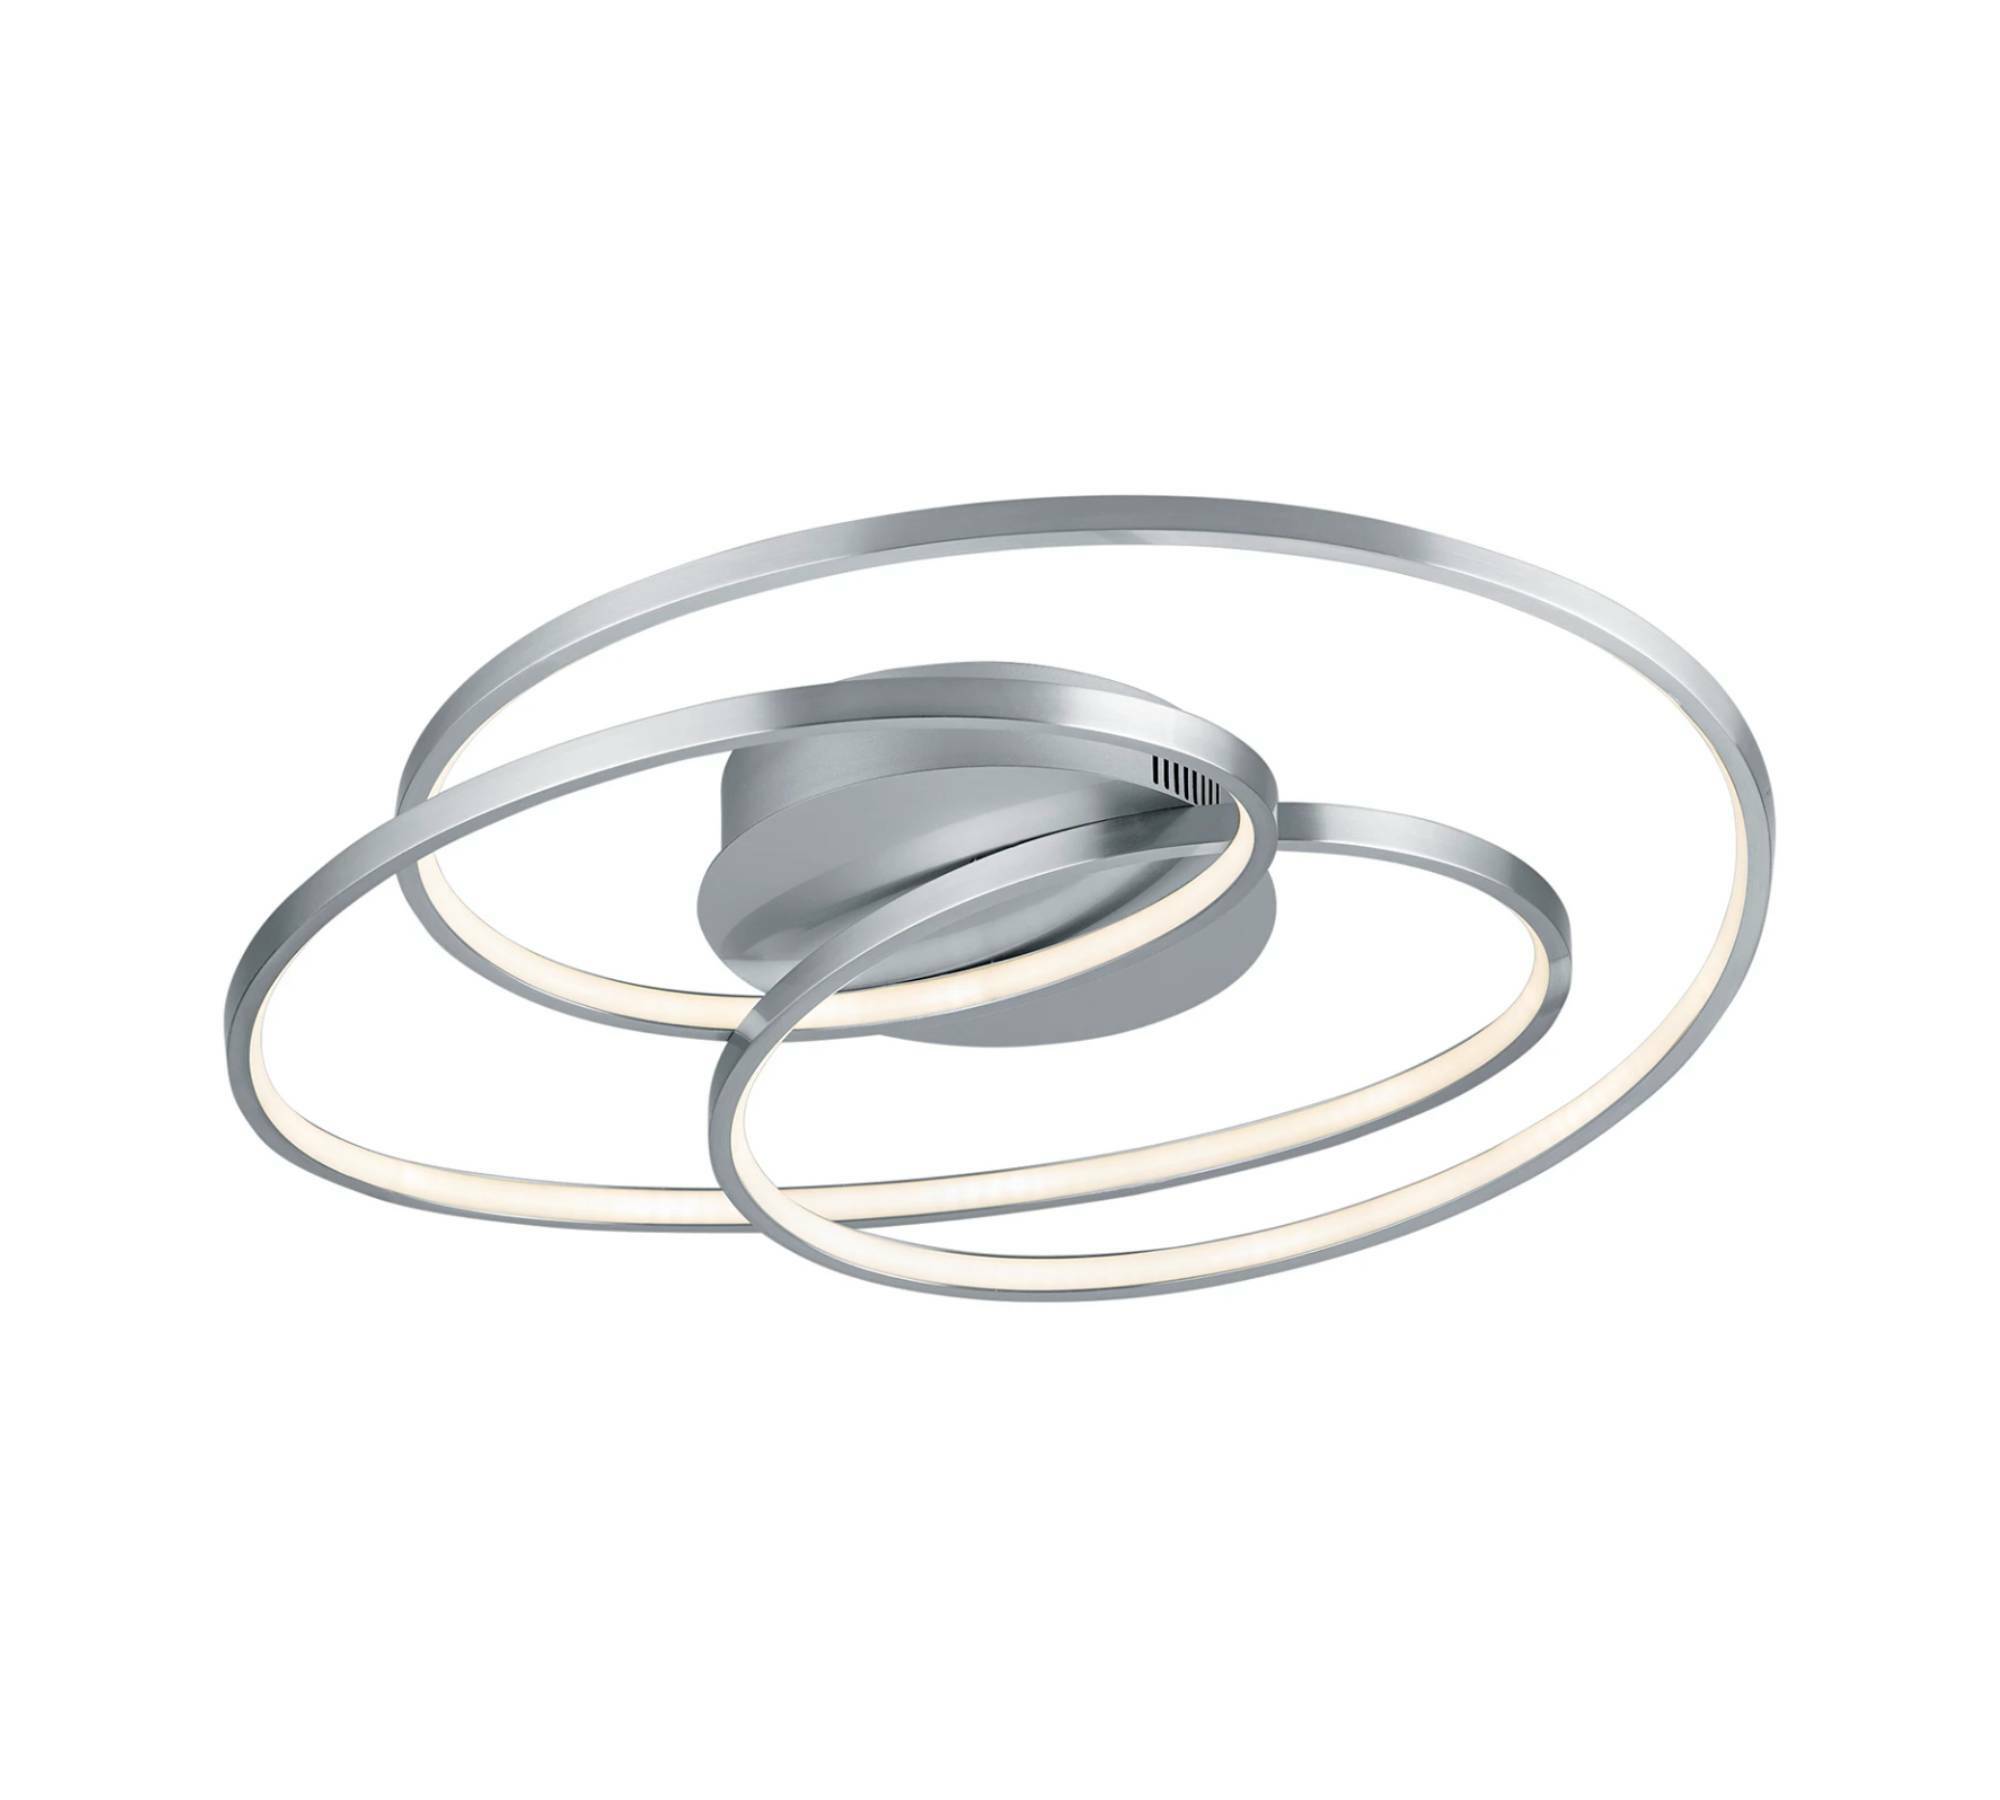 1-Flammige LED-Deckenleuchte Silber Oval 0